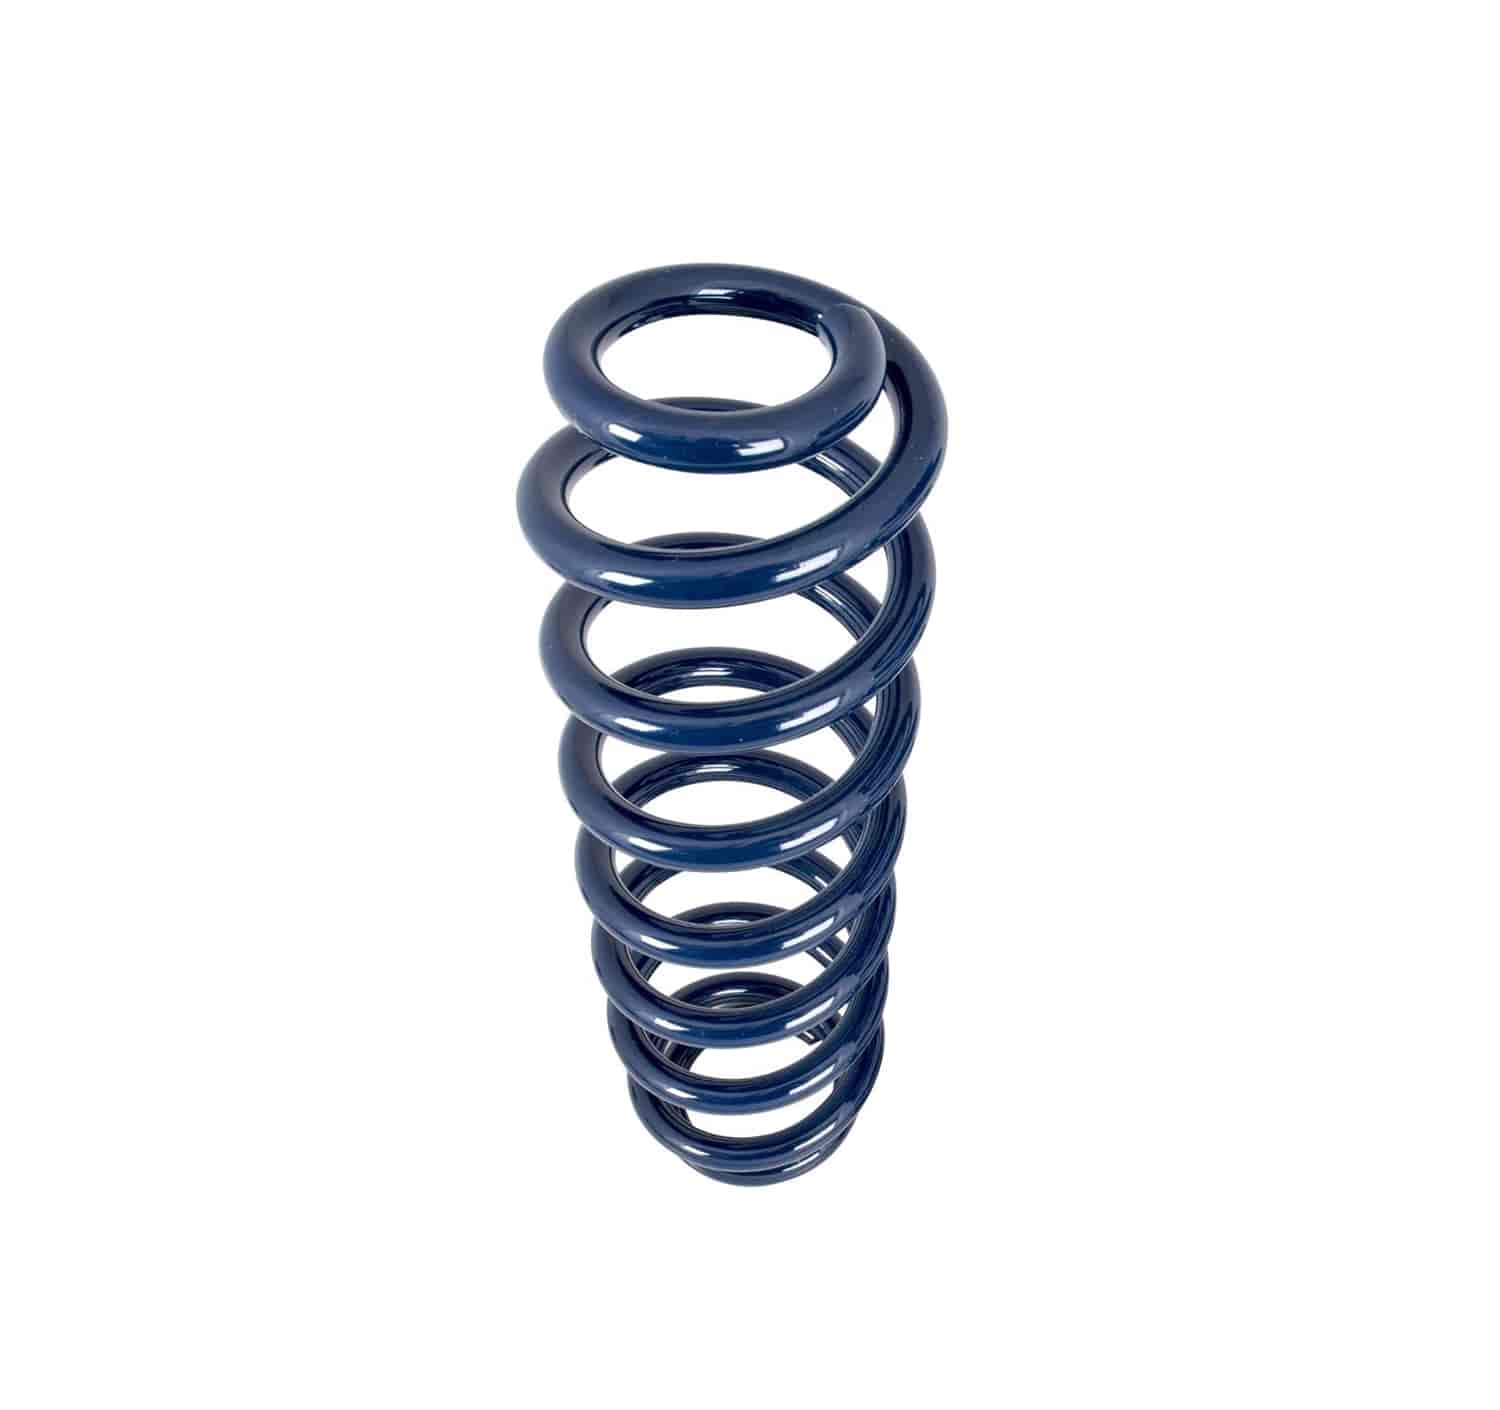 300 Lbs Hypercoil spring each- Fits S5069 S5269 S5071 and S5271